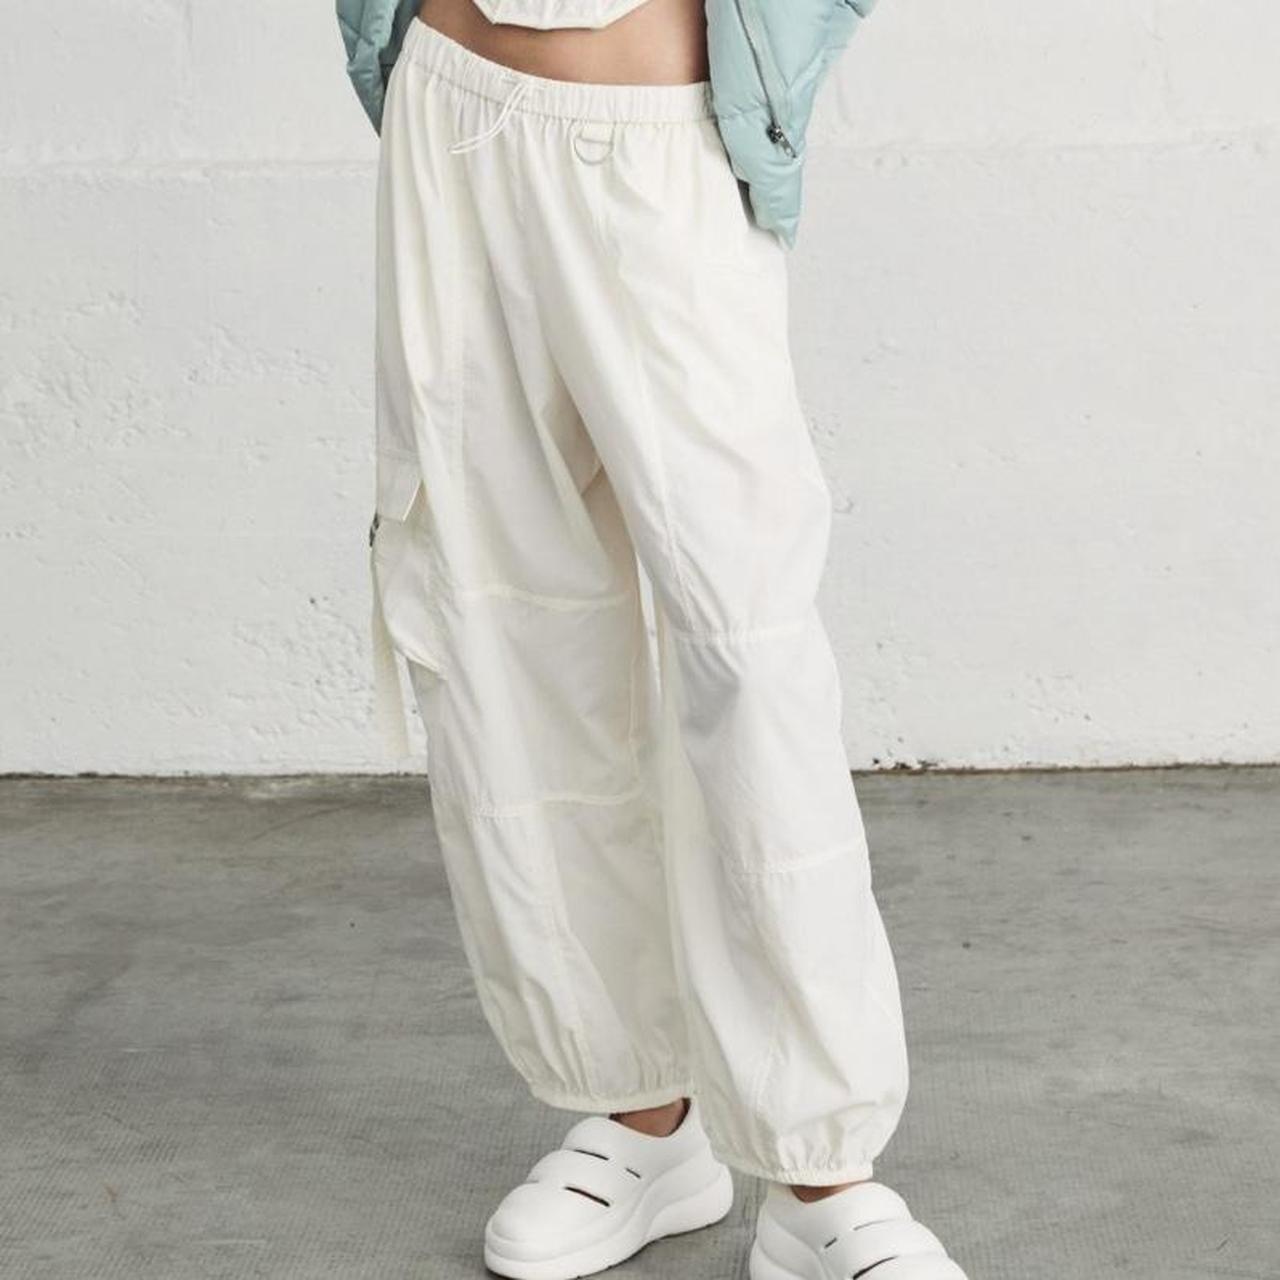 Urban Outfitters Women's Trousers